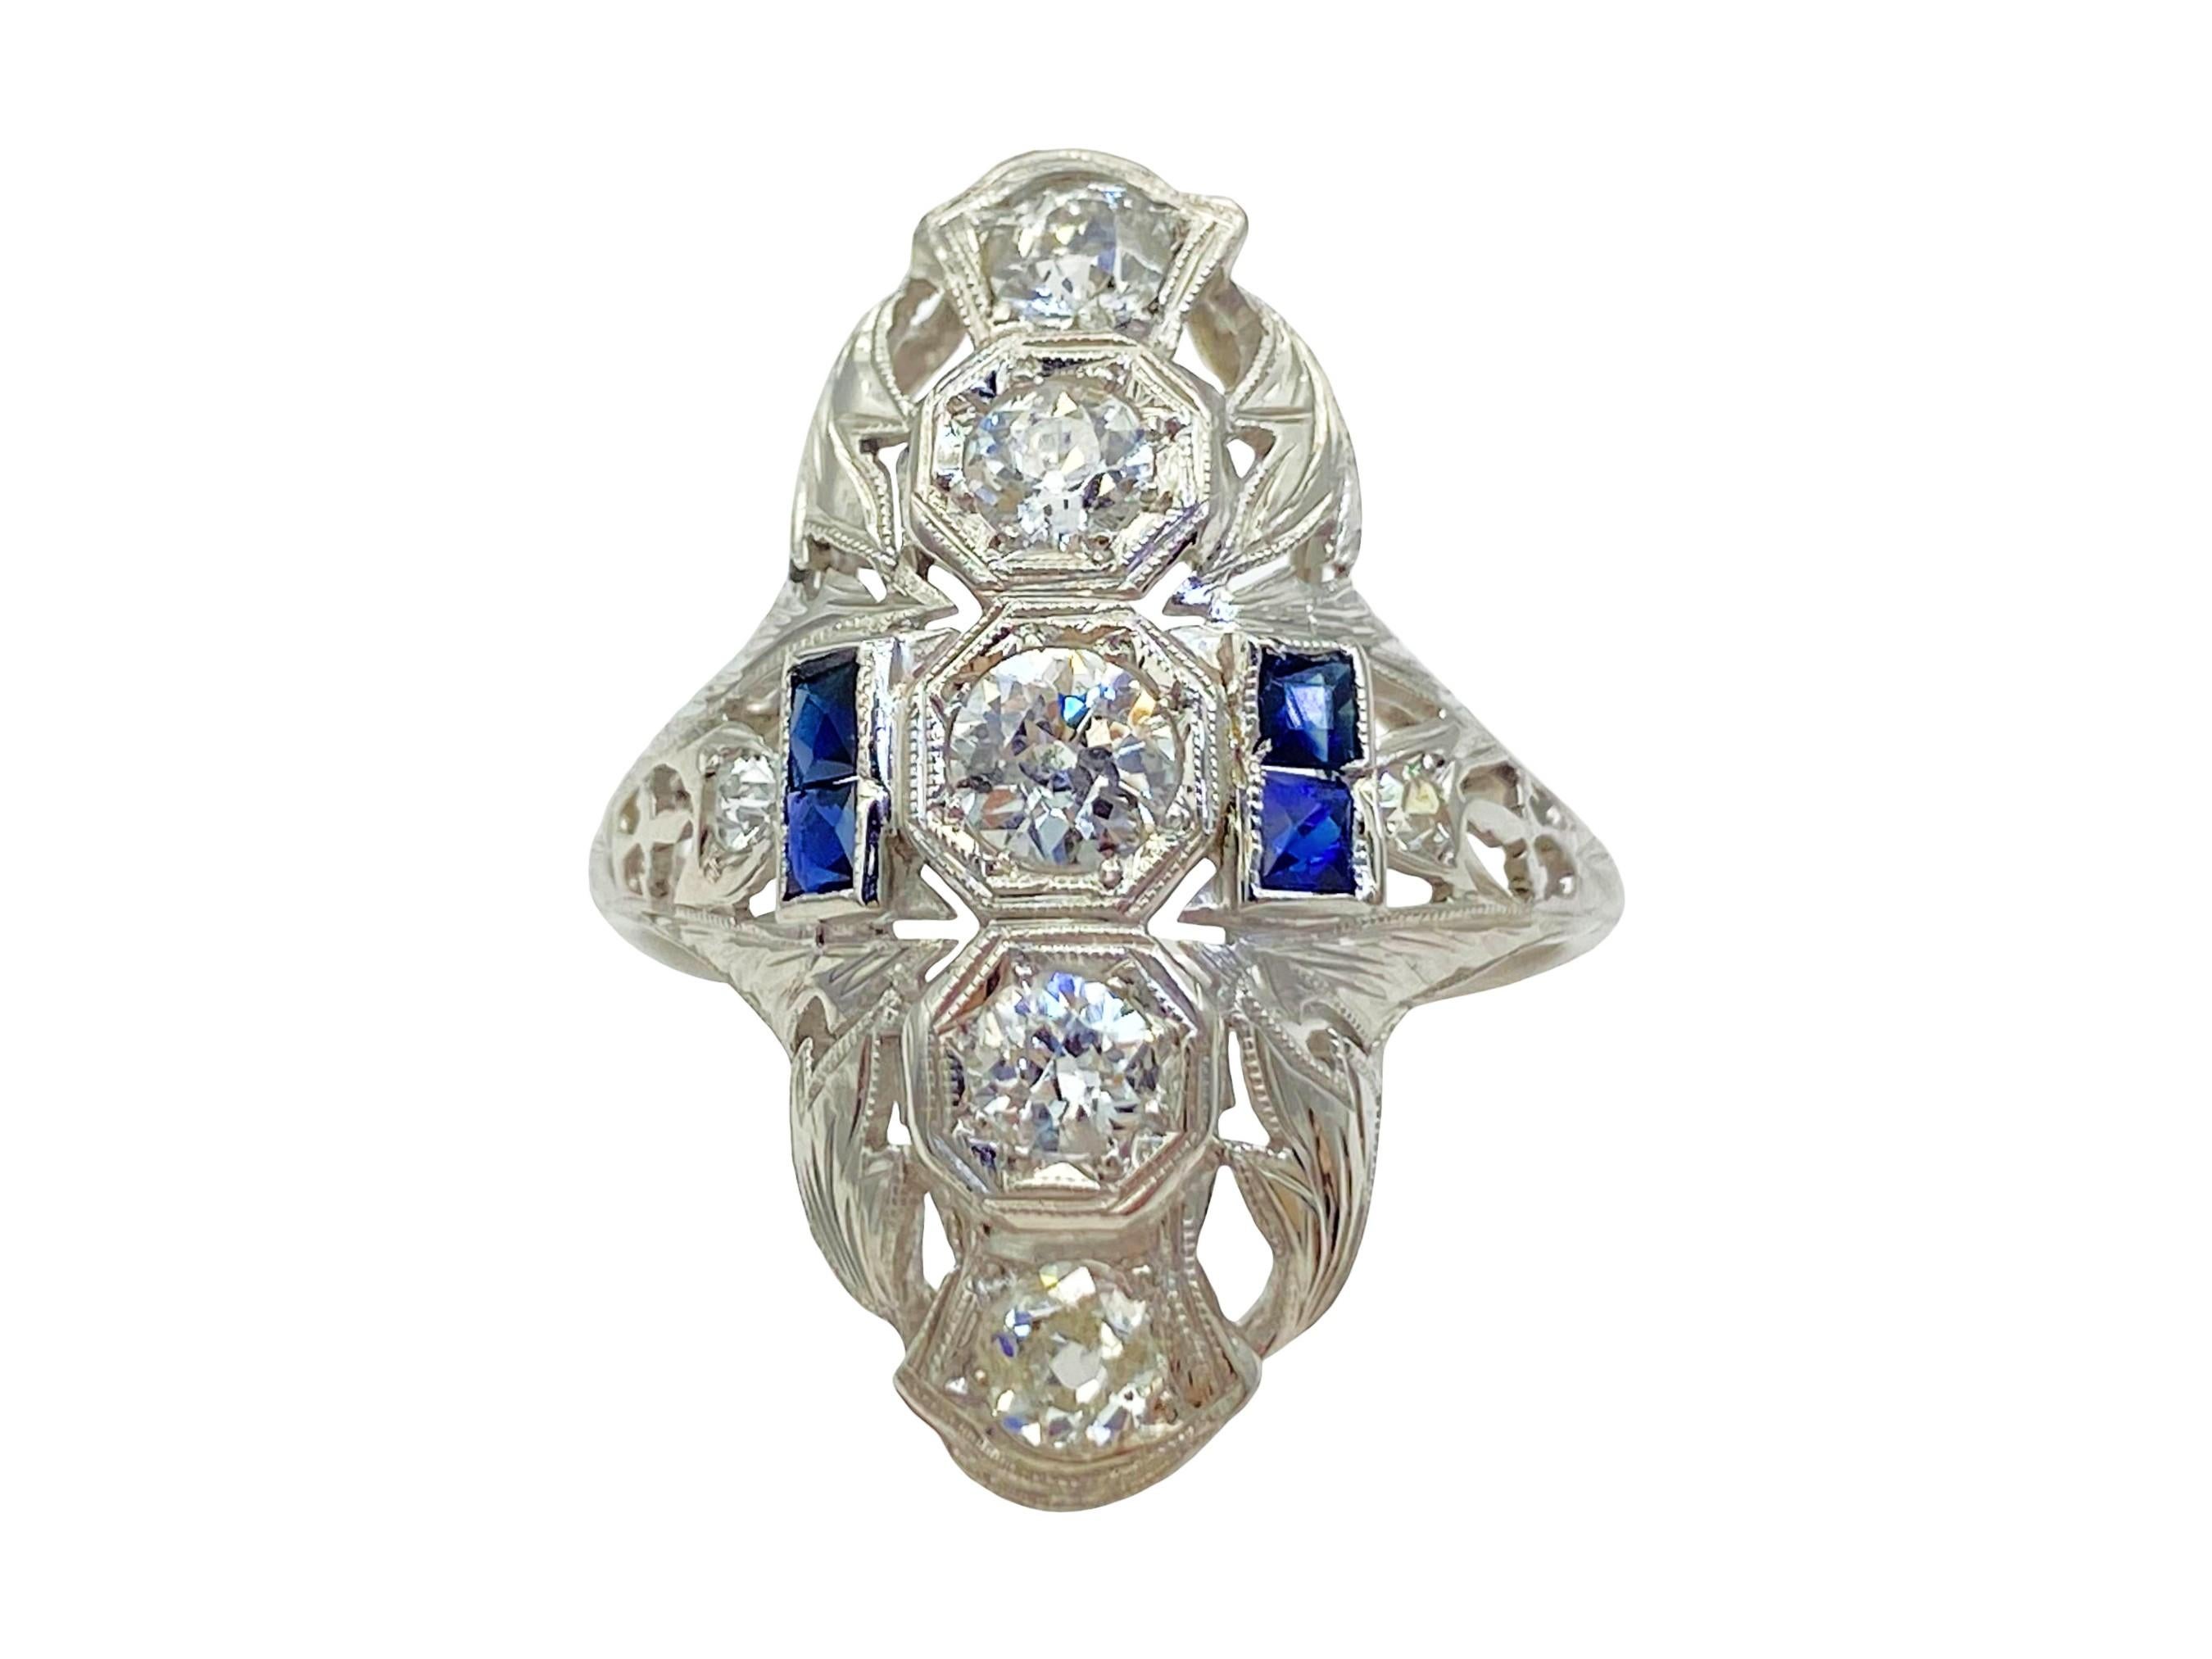 This is a fine antique Art Deco diamond and natural sapphire ring circa the 1920s. This stunning ring is comprised of 7 diamonds and 4 natural blue sapphires. Five old European cut diamonds are prong-set in octagonal settings down the length of the